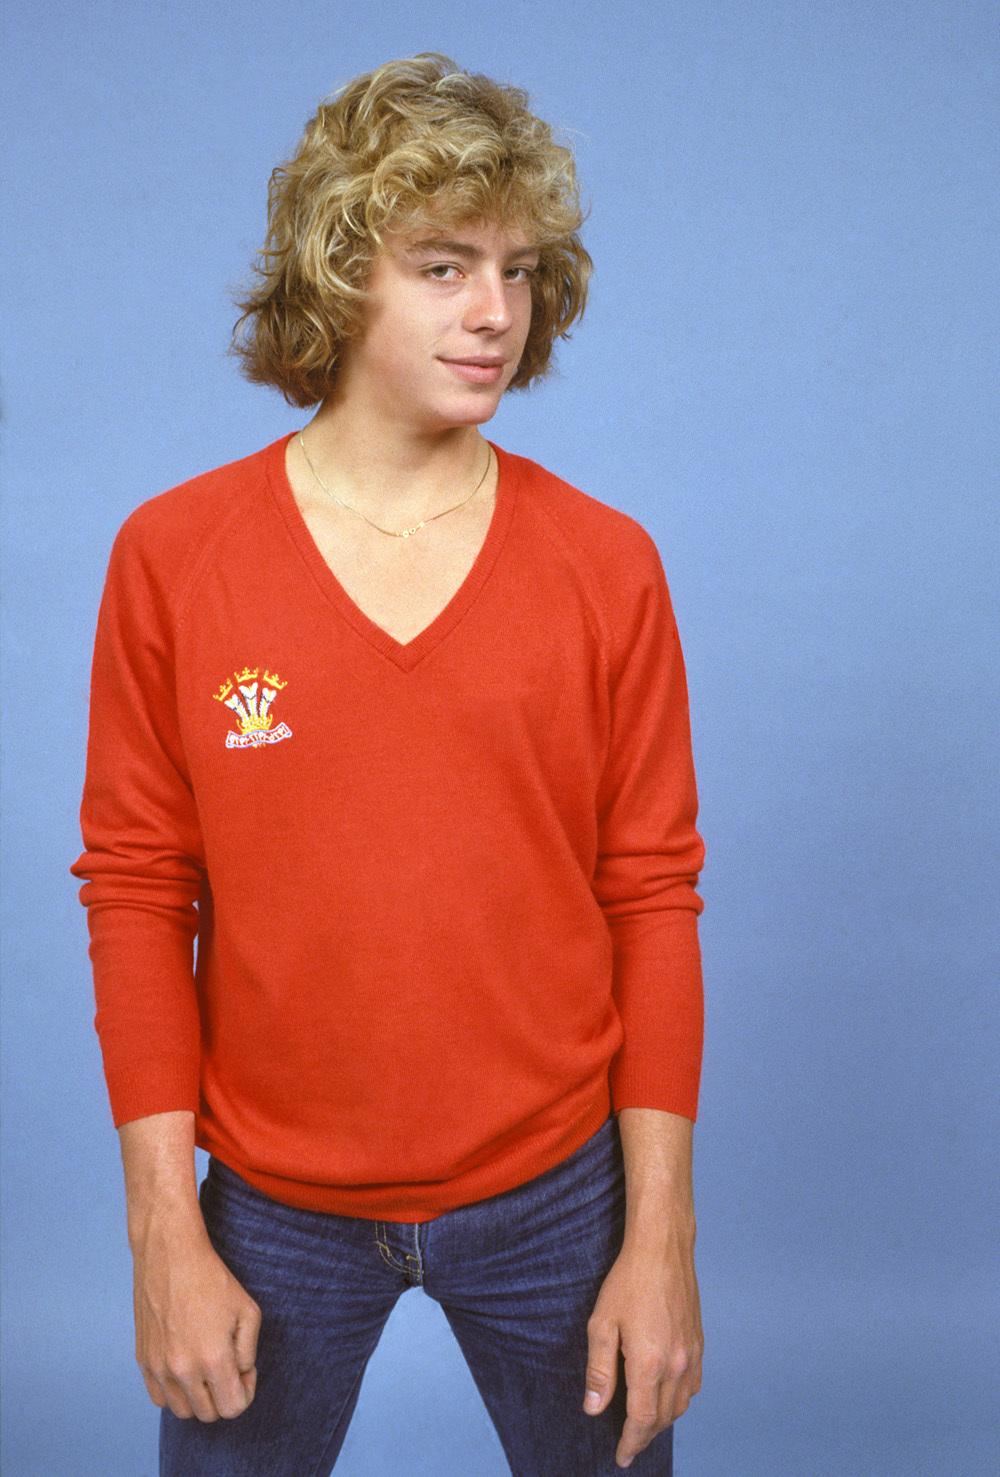 Brad Elterman S Photos Of Famous Teen Heartthrobs From The 1970s Vice United Kingdom